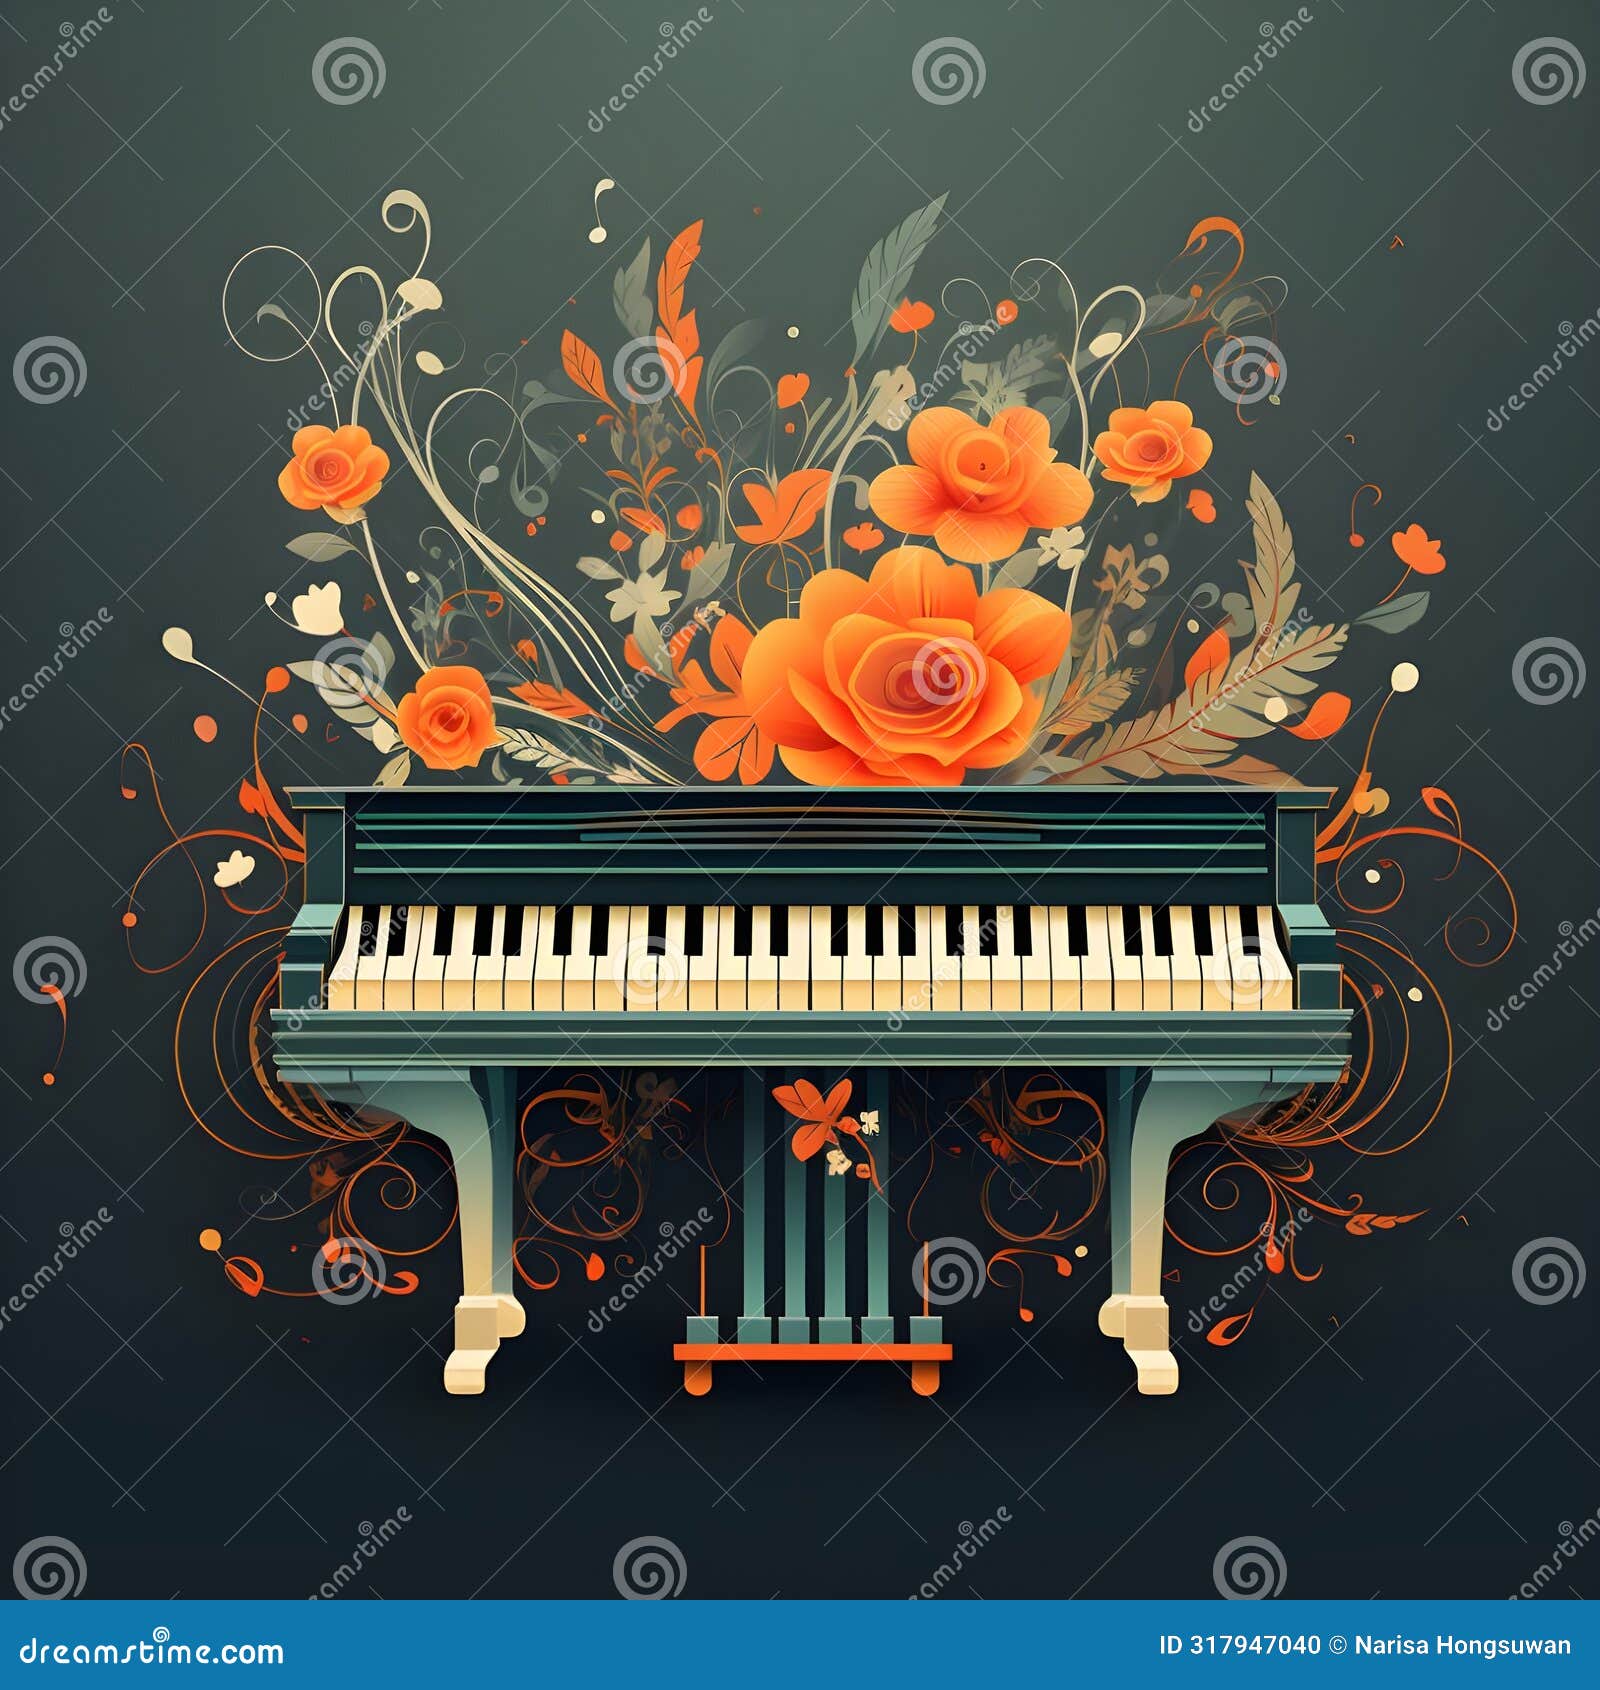 an abstract image of a grand piano that is colorful and bright. abstract colorful piano keyboard keys as wallpaper background